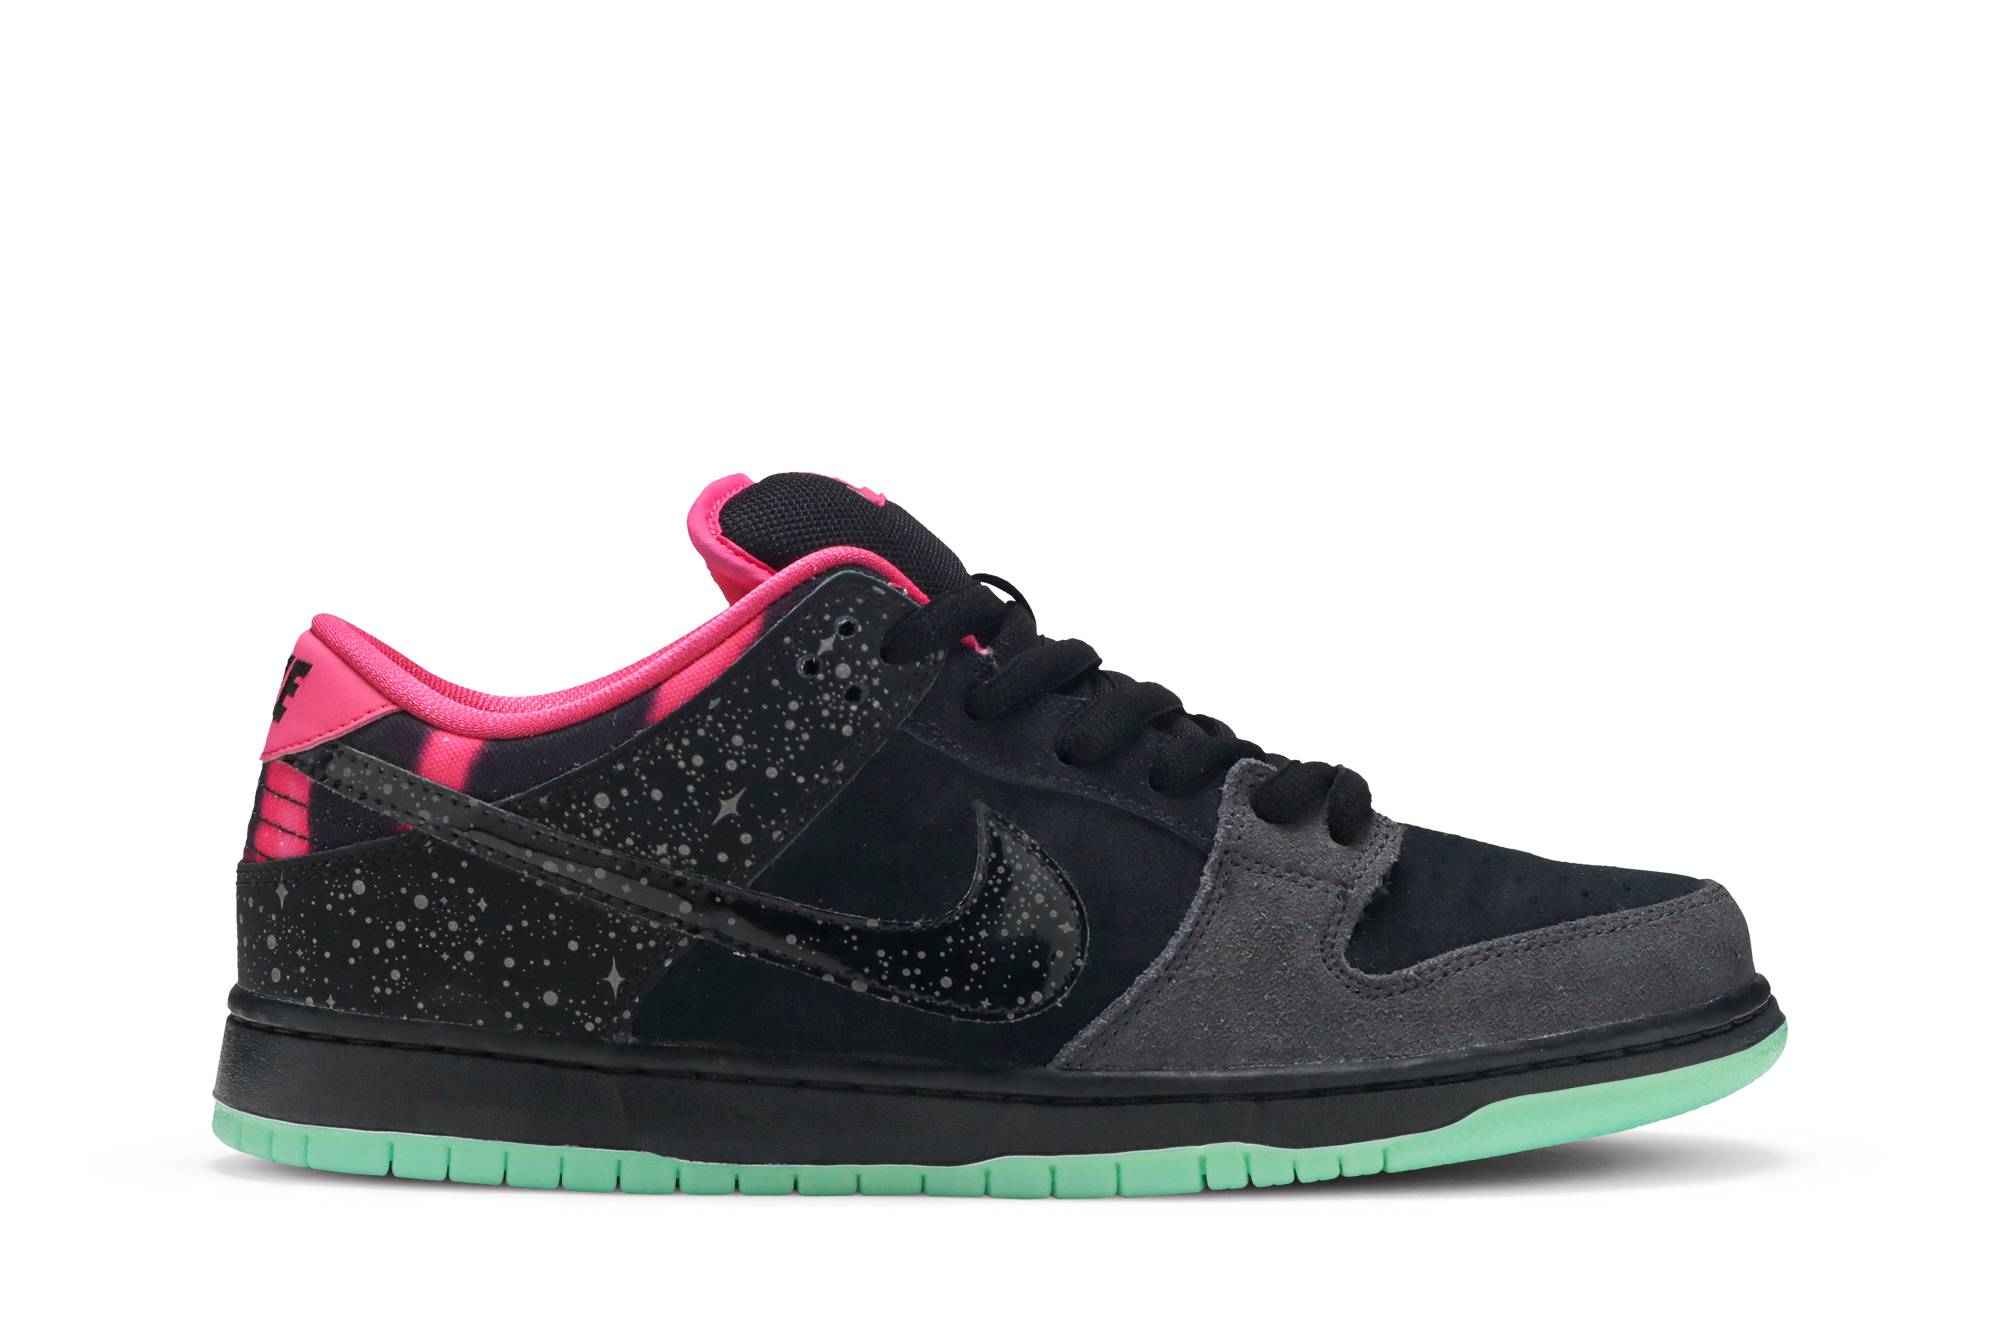 northern lights dunk low